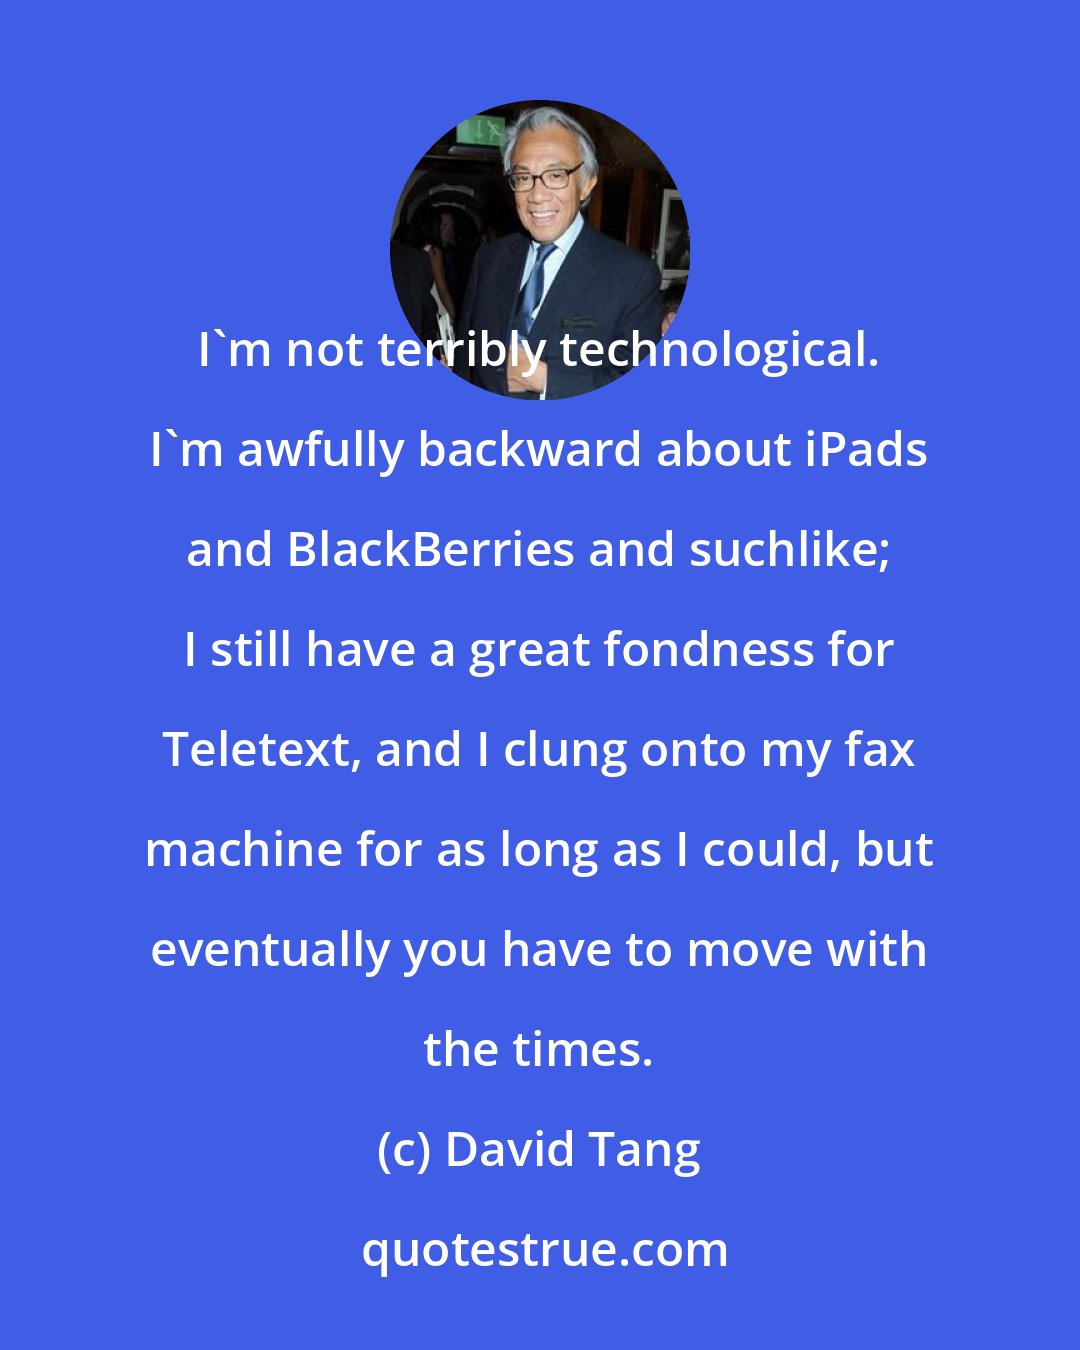 David Tang: I'm not terribly technological. I'm awfully backward about iPads and BlackBerries and suchlike; I still have a great fondness for Teletext, and I clung onto my fax machine for as long as I could, but eventually you have to move with the times.